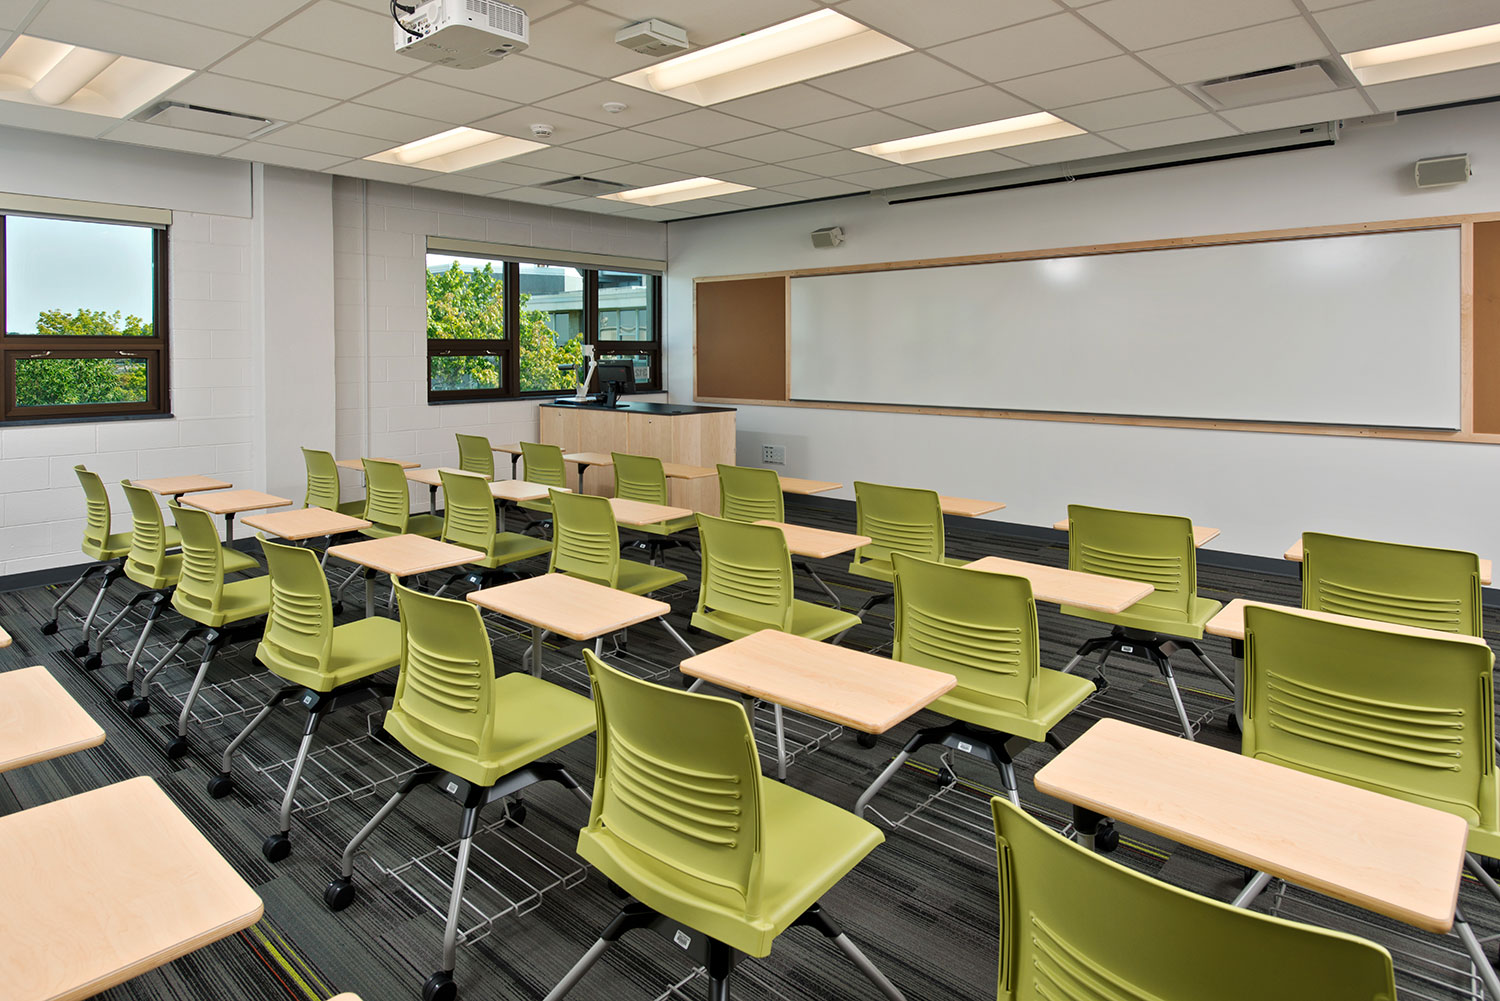 Teaching classroom at Mosaic Associates College Science Center design for Hudson Valley Community College in Troy, New York.